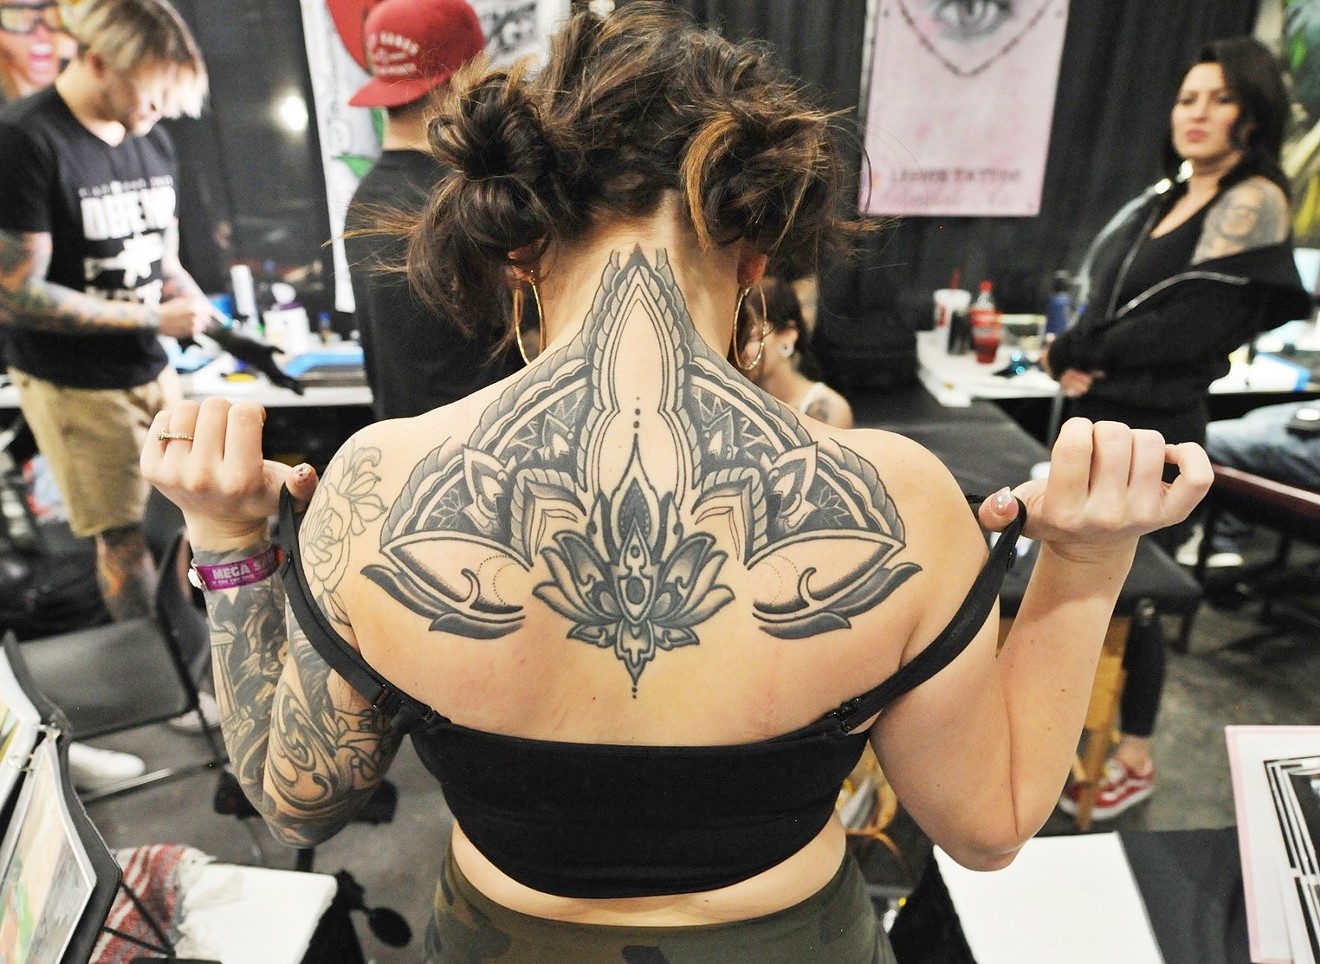 The tattoo artists at the latest Body Art Expo will get under your skin.